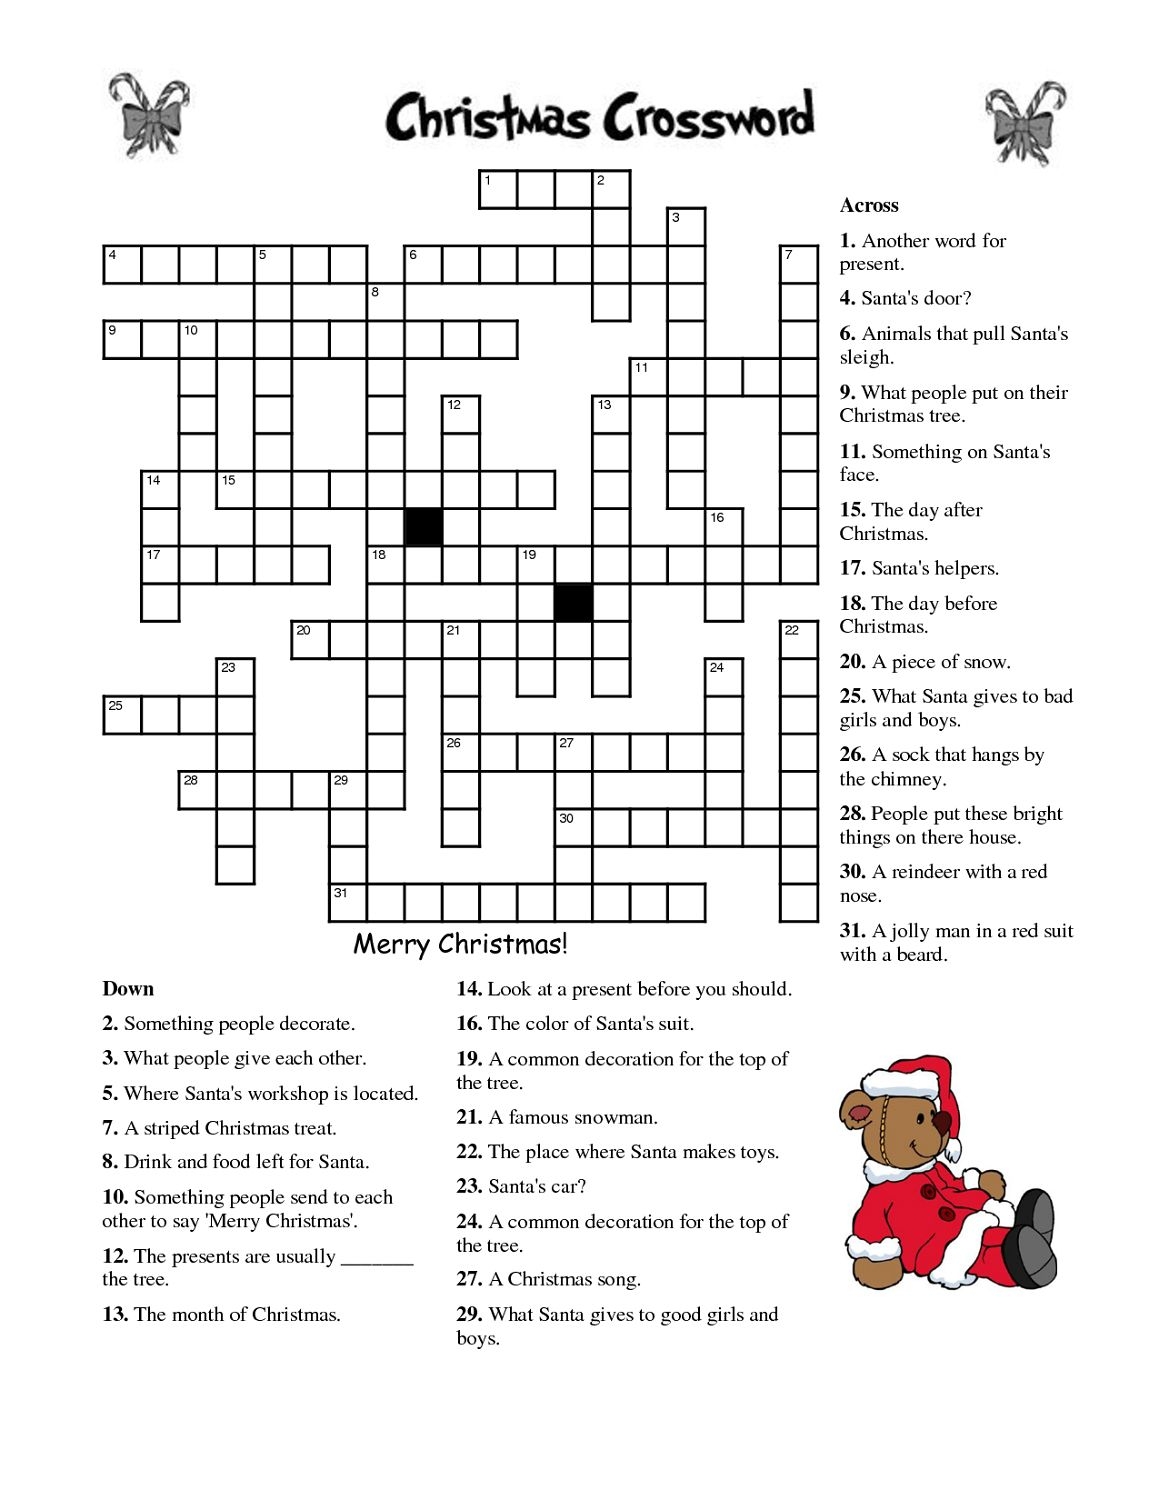 Printable Christmas Crossword Puzzle For Adults Christmas Crossword Puzzles Free Printable Crossword Puzzles Christmas Crossword